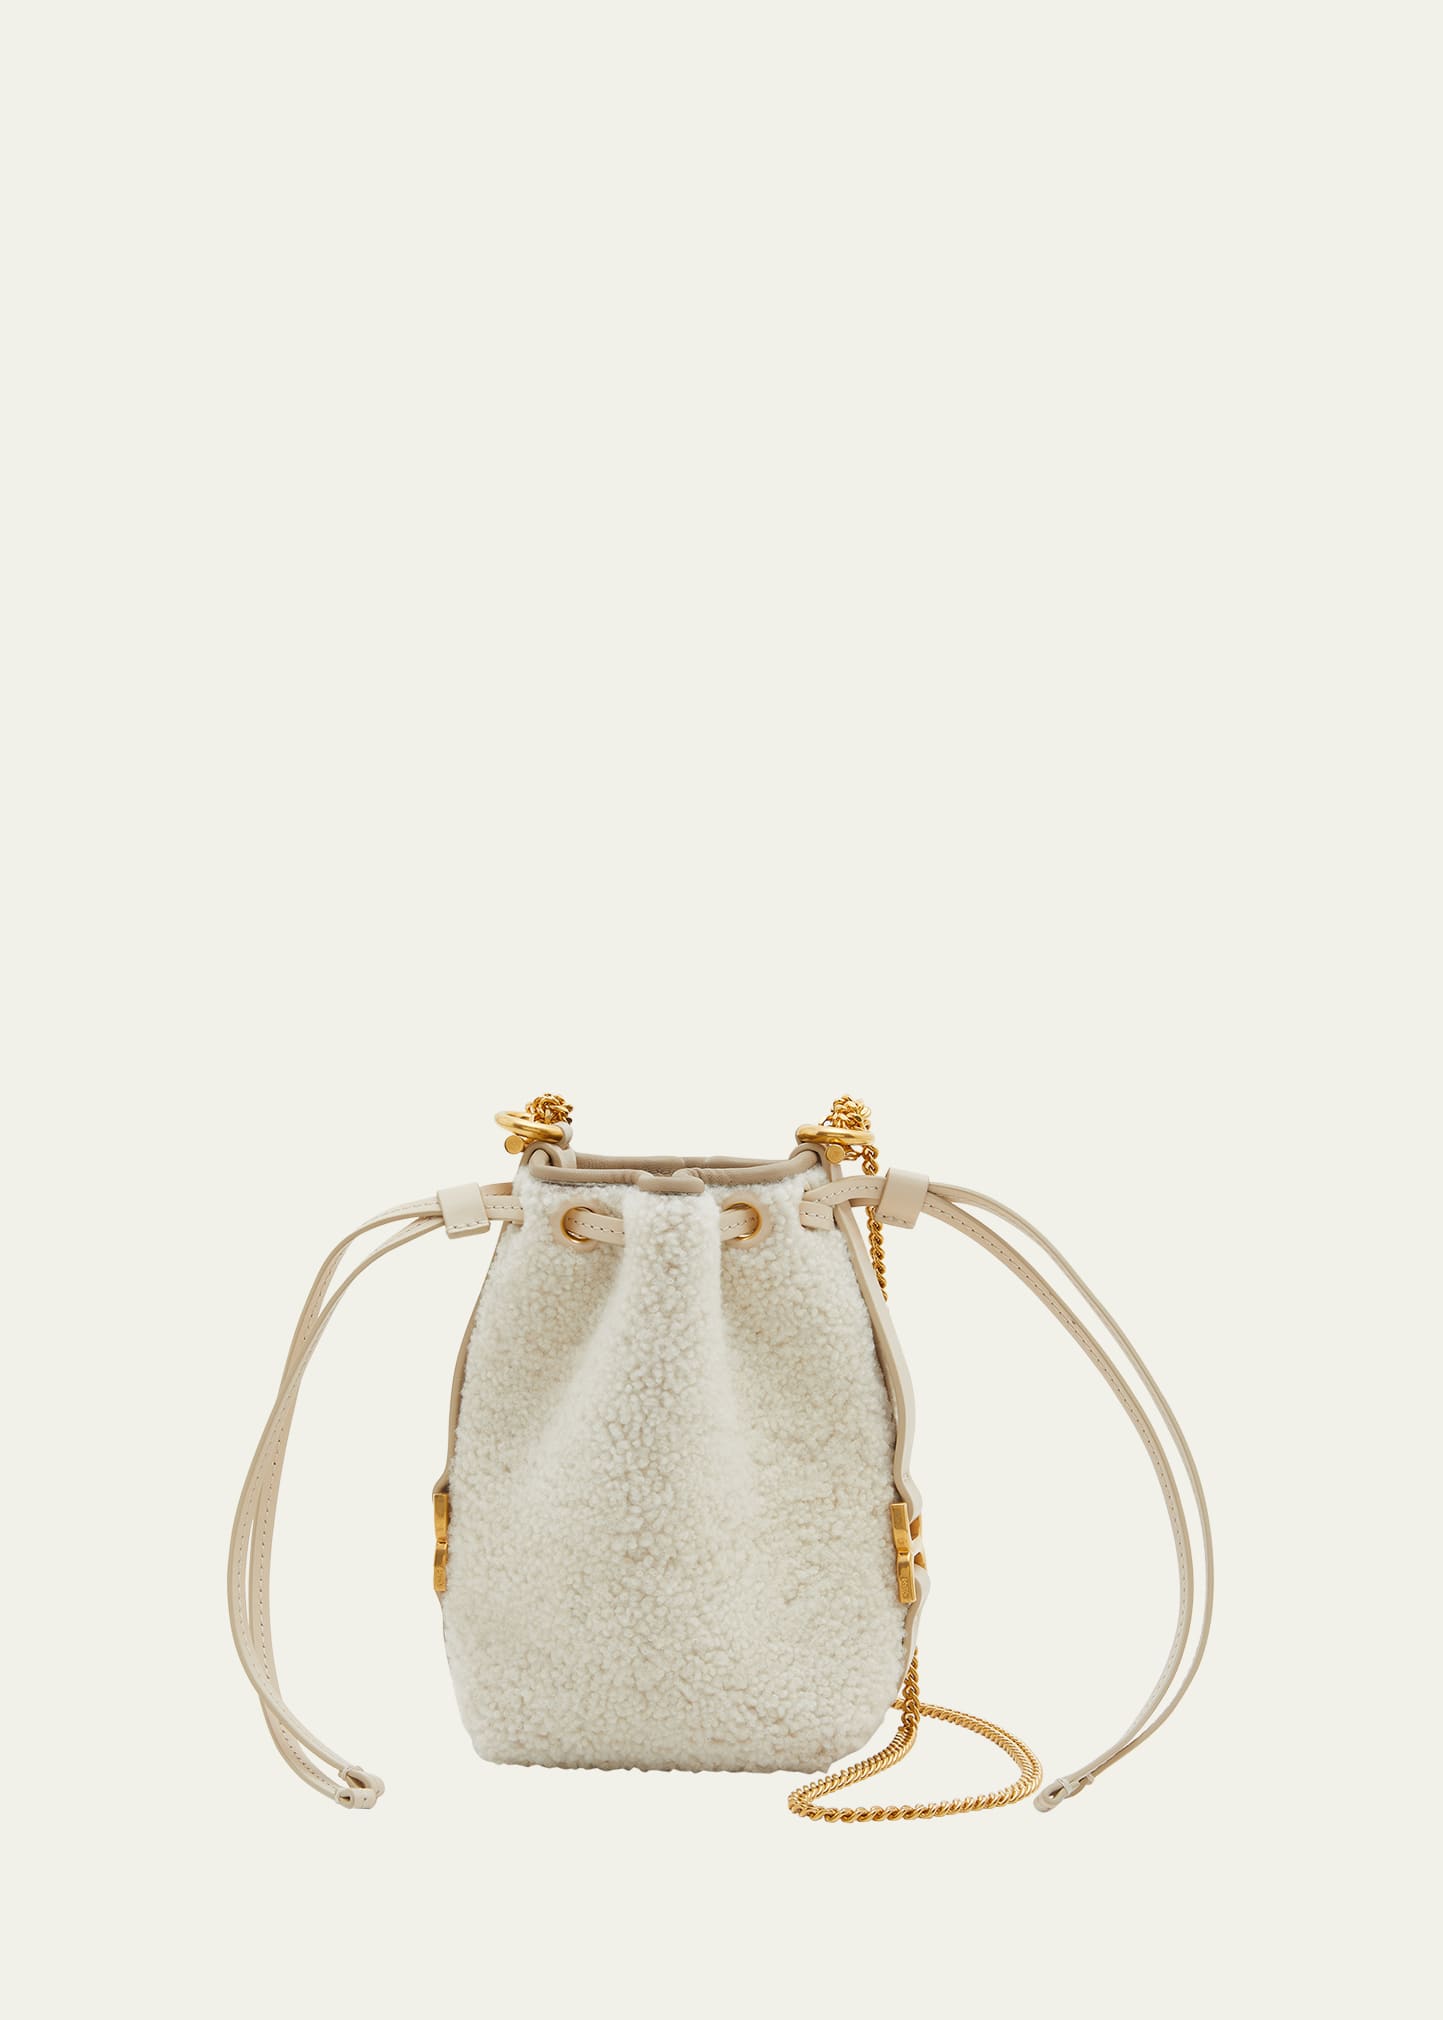 Marcie Micro Bucket Bag in Shearling with Chain Strap